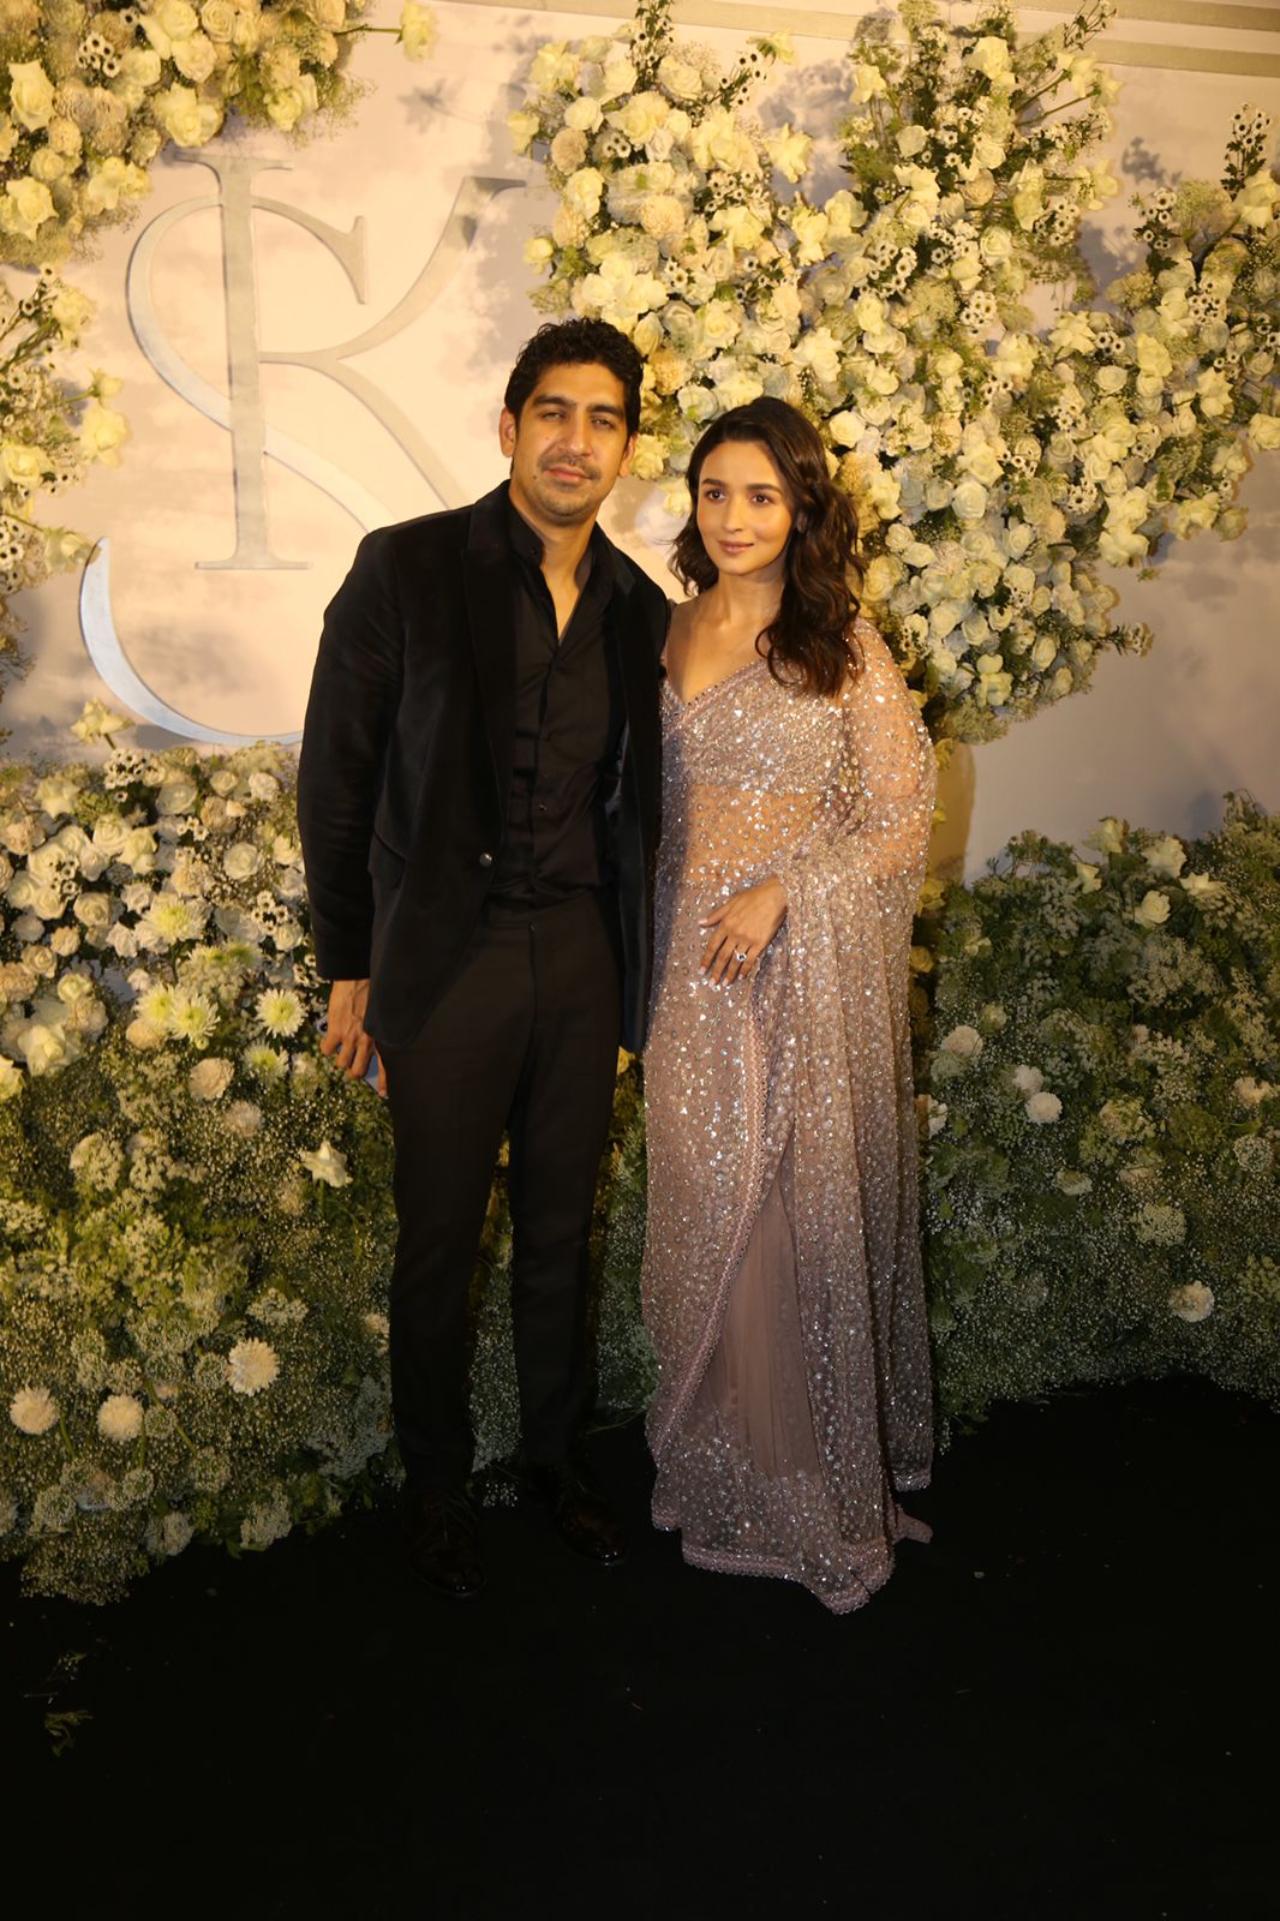 Alia Bhatt looked stunning in a shimmery pink saree. She was accompanied by her good friend and filmmaker Ayan Mukerji